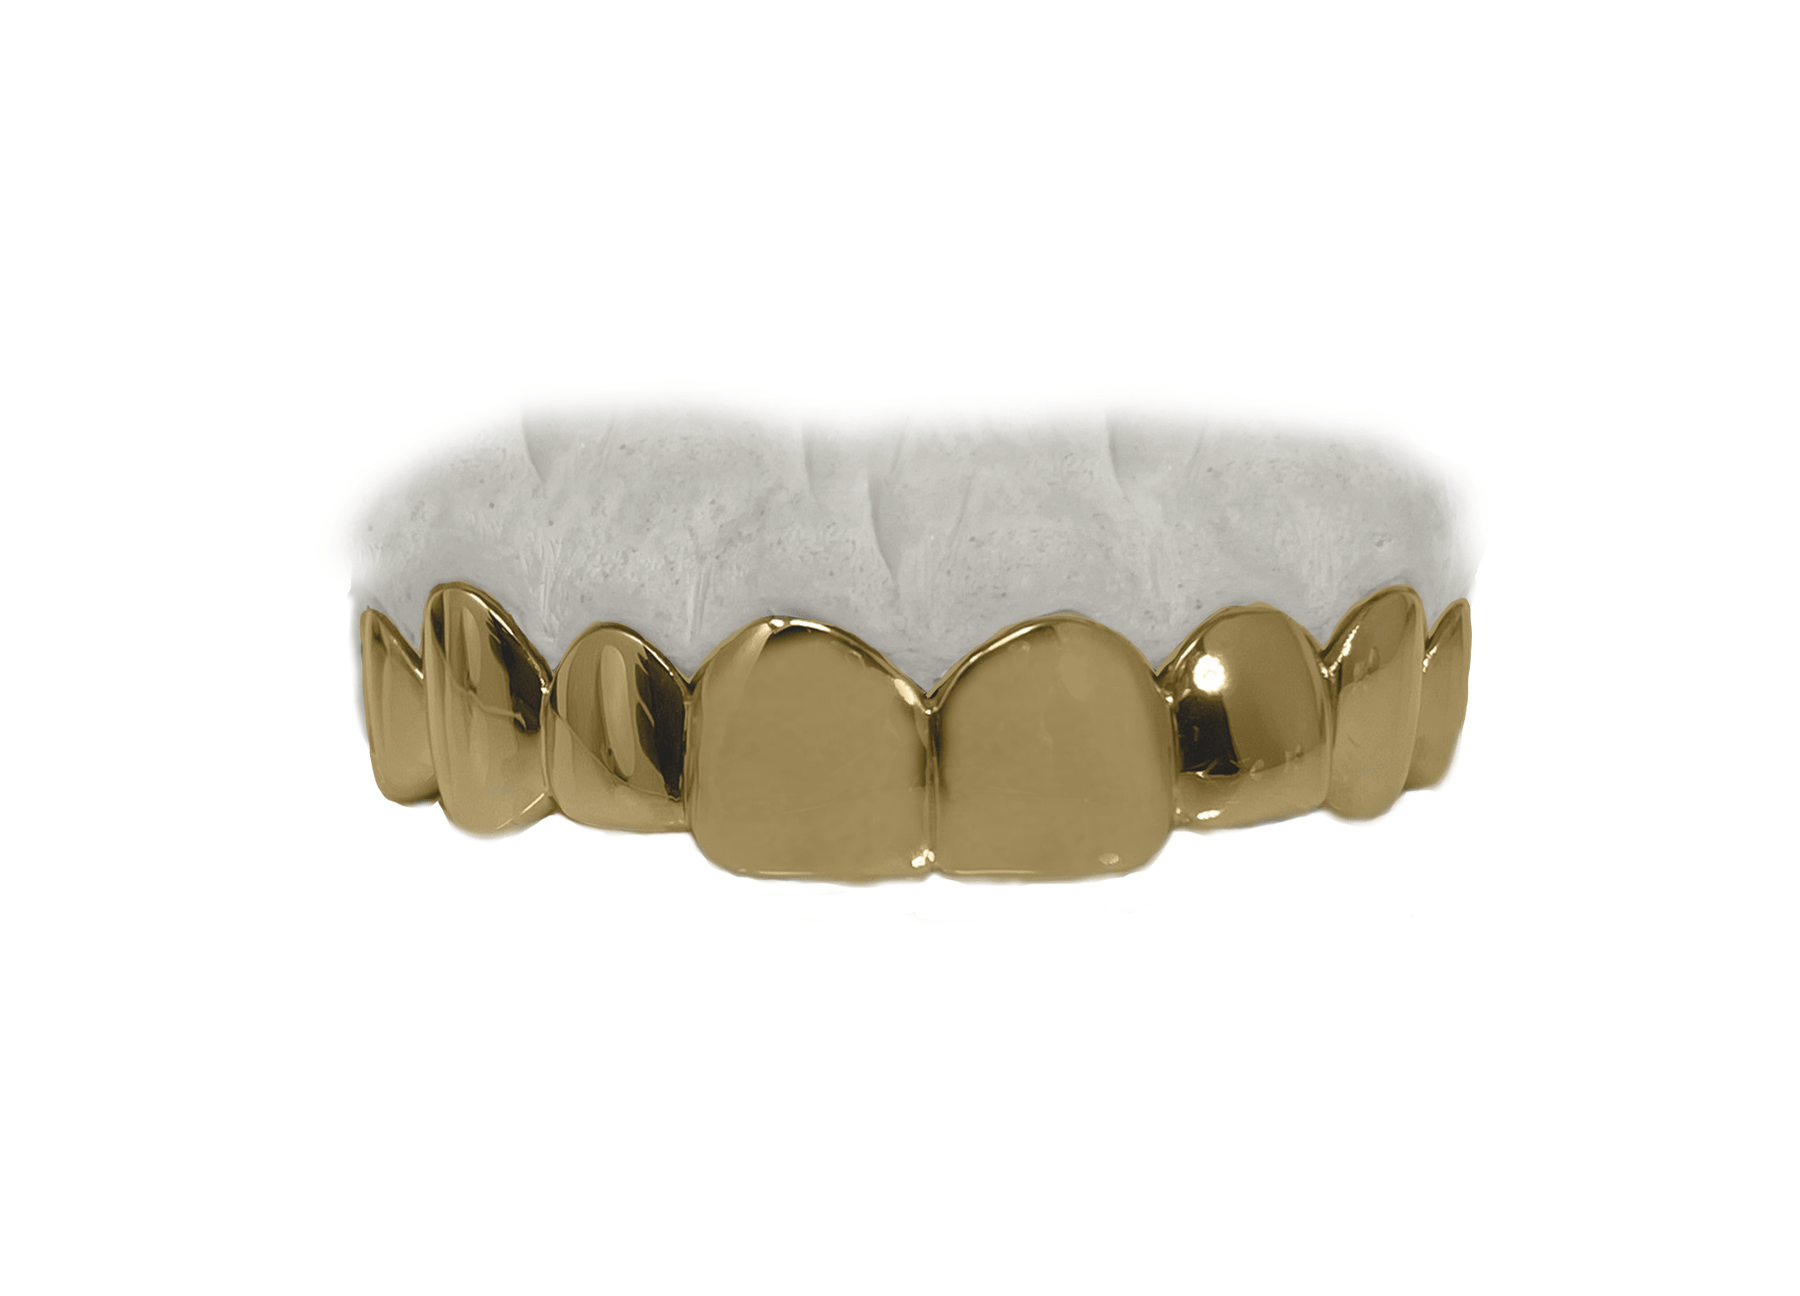 Buy Grillz Molding Kit - Real Gold and Diamond Teeth Online – Luxe